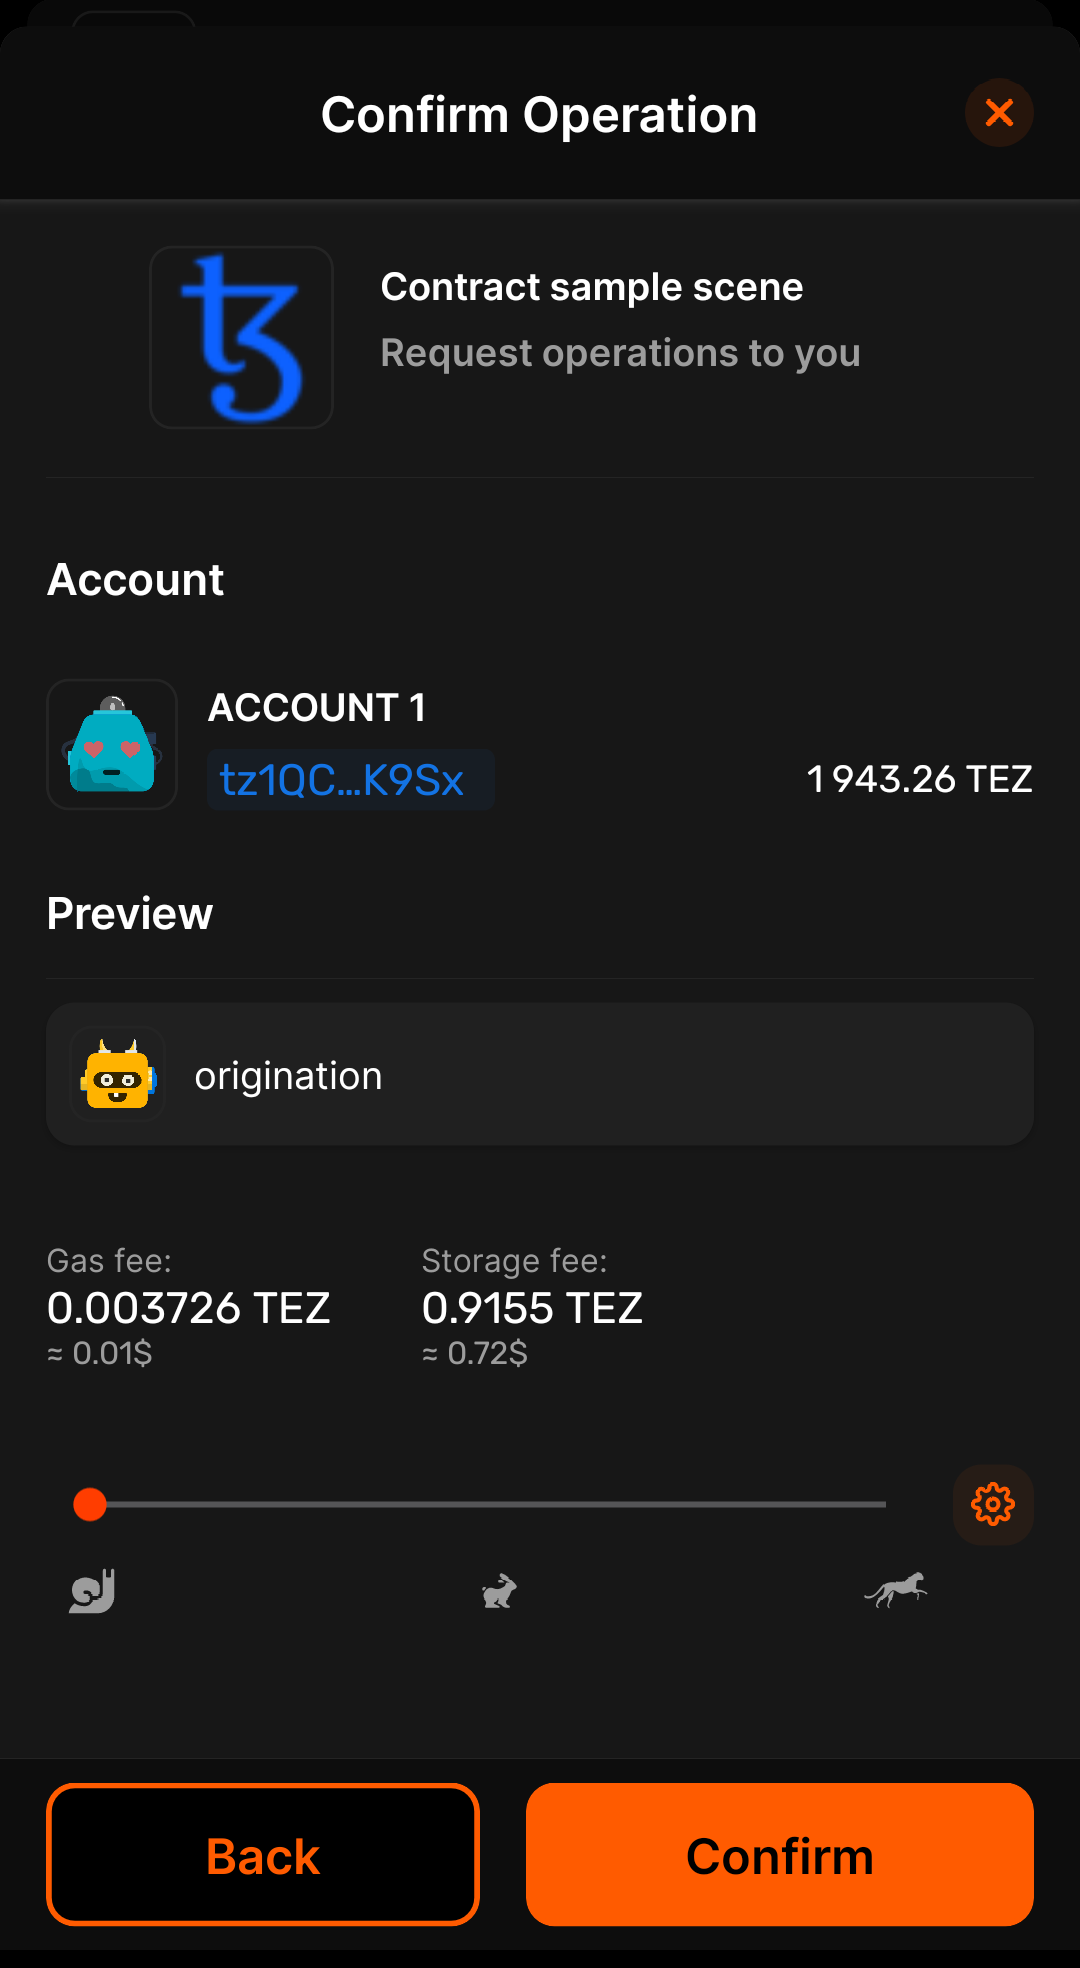 Approving the contract deployment transaction in the wallet app